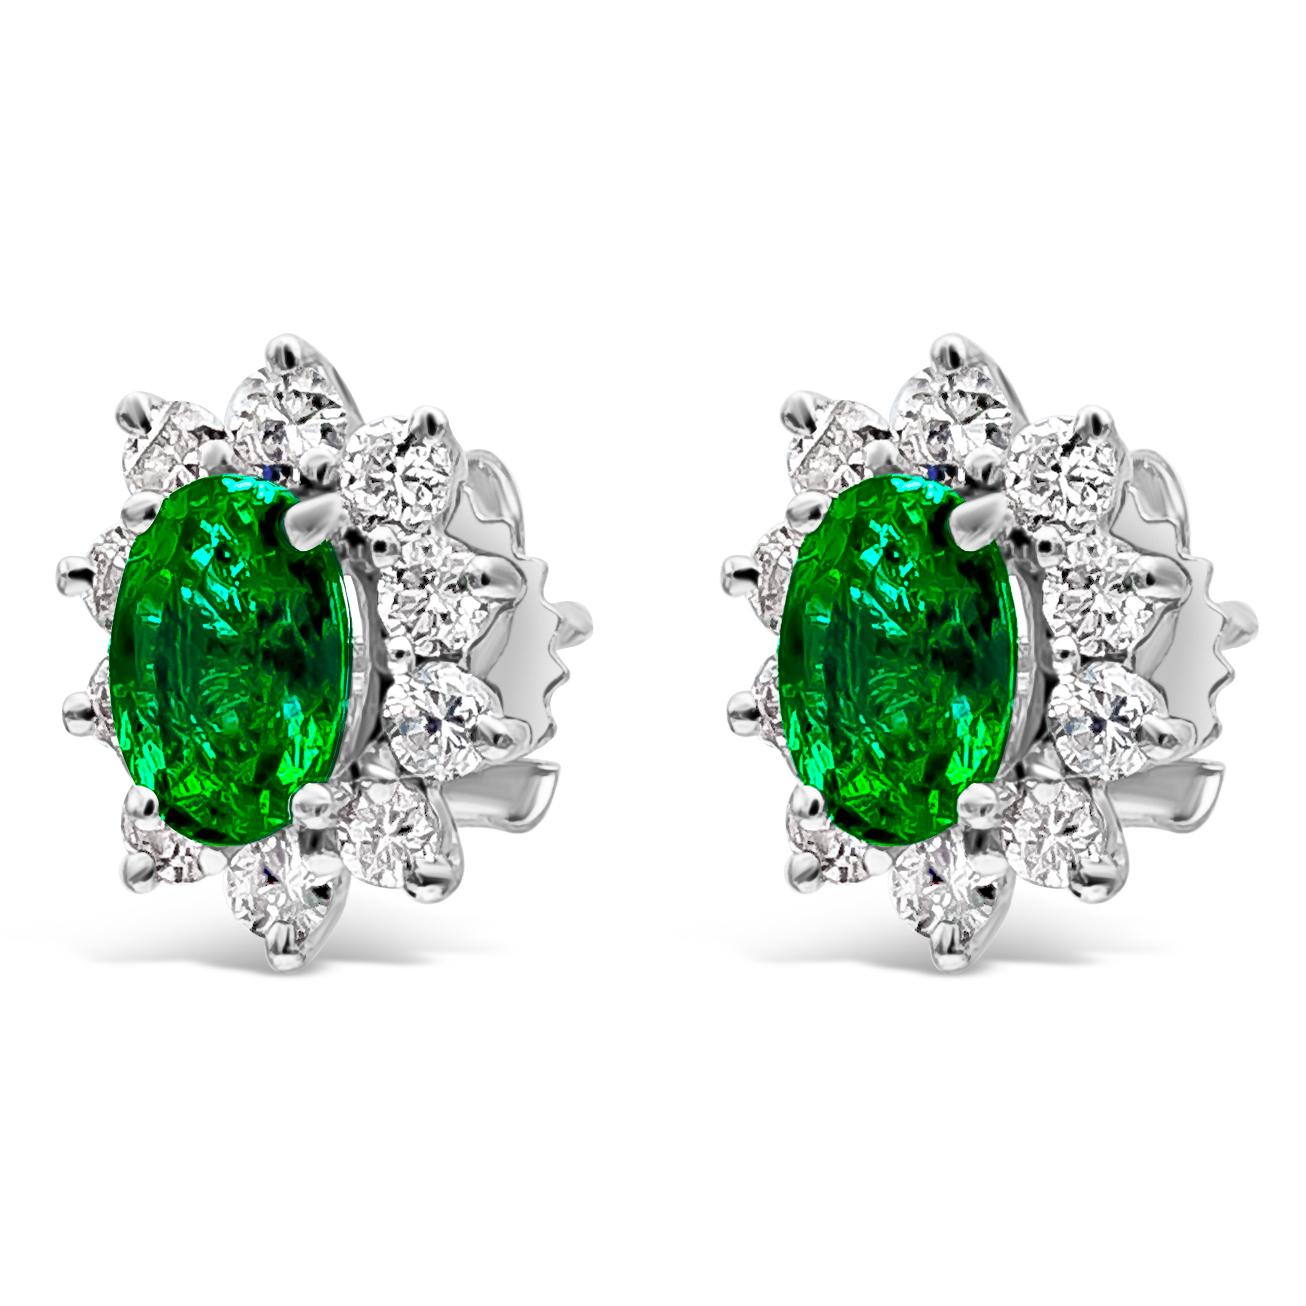 A classic pair of stud earrings in a floral-motif design showcasing oval cut green emeralds weighing 1.37 carats total. Surrounded by a single row of round brilliant diamonds weighing 0.75 carat total. Made with 18K White Gold

Style available in